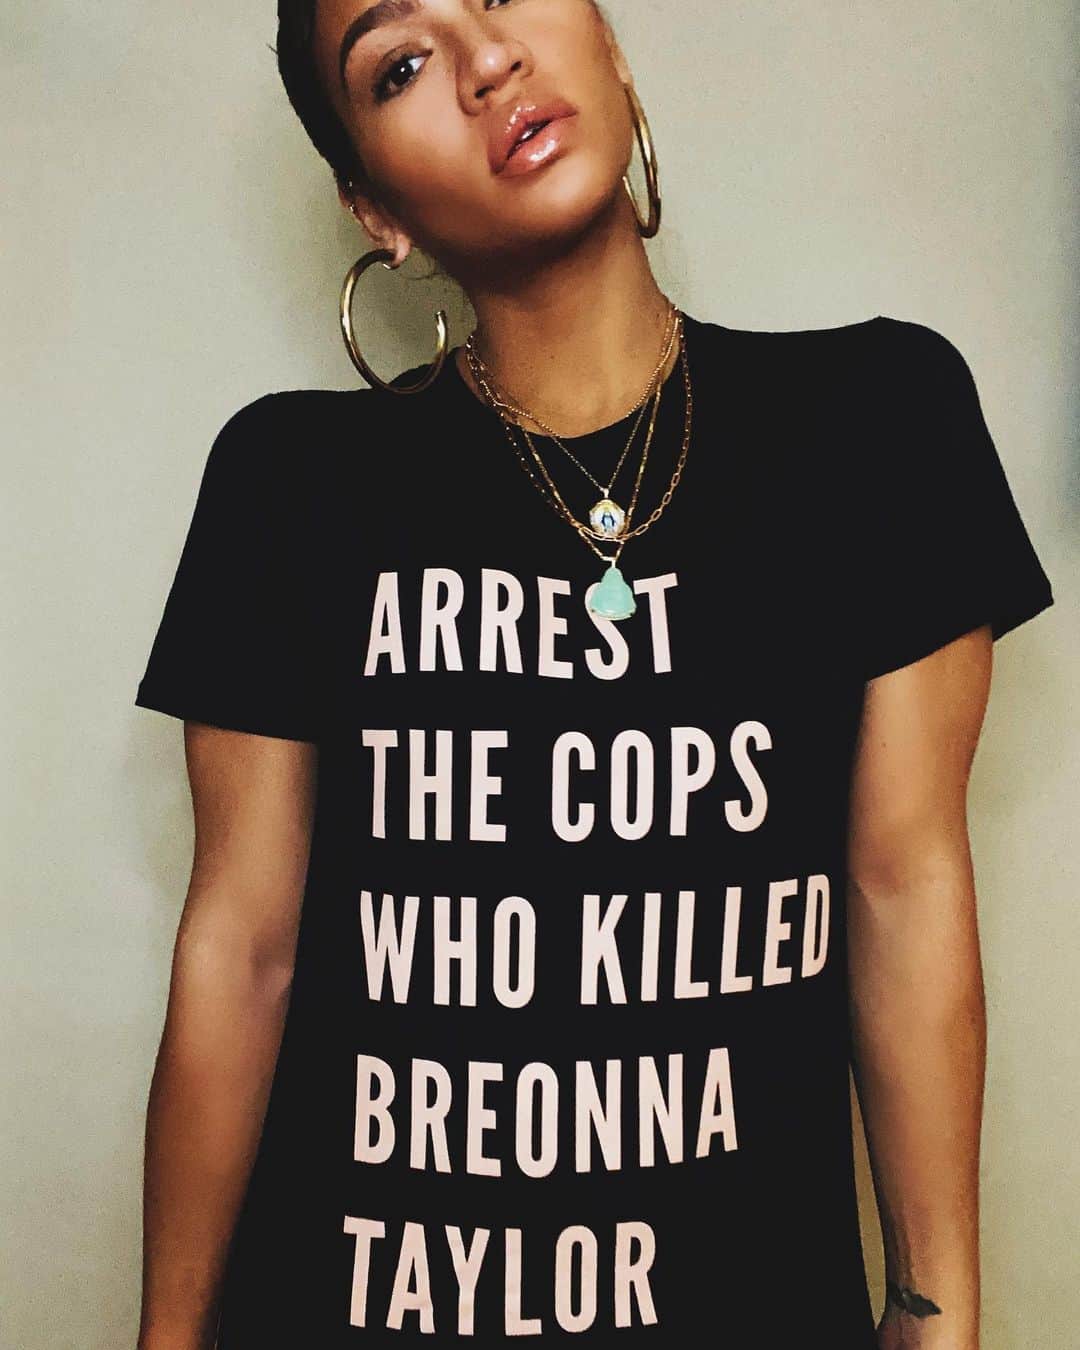 cassieのインスタグラム：「Today marks 6 months since Breonna Taylor was murdered in her home by Jonathan Mattingly, Brett Hankison, and Myles Cosgrove—and her killers have not been charged. 6 MONTHS!!! Too often Black women who die from police violence are forgotten. Let’s stay loud, keep demanding justice for Breonna and her family, and SAY HER NAME. This tee was created by @phenomenal in partnership with the Breonna Taylor Foundation, to which all profits are donated #justiceforbreonnataylor ✊🏽」